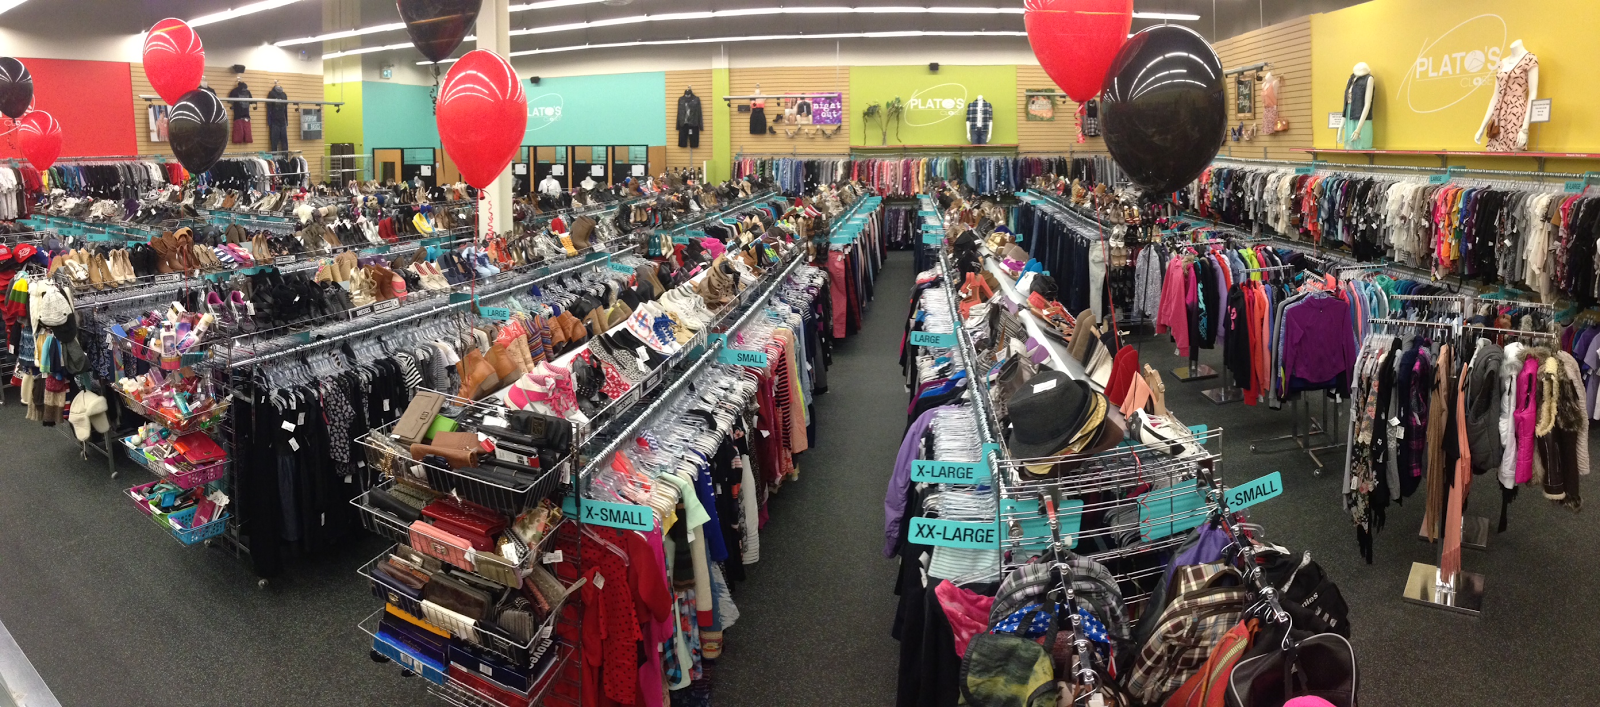 How To: Sell Clothes at Plato's Closet, The Awk(word) Wiki